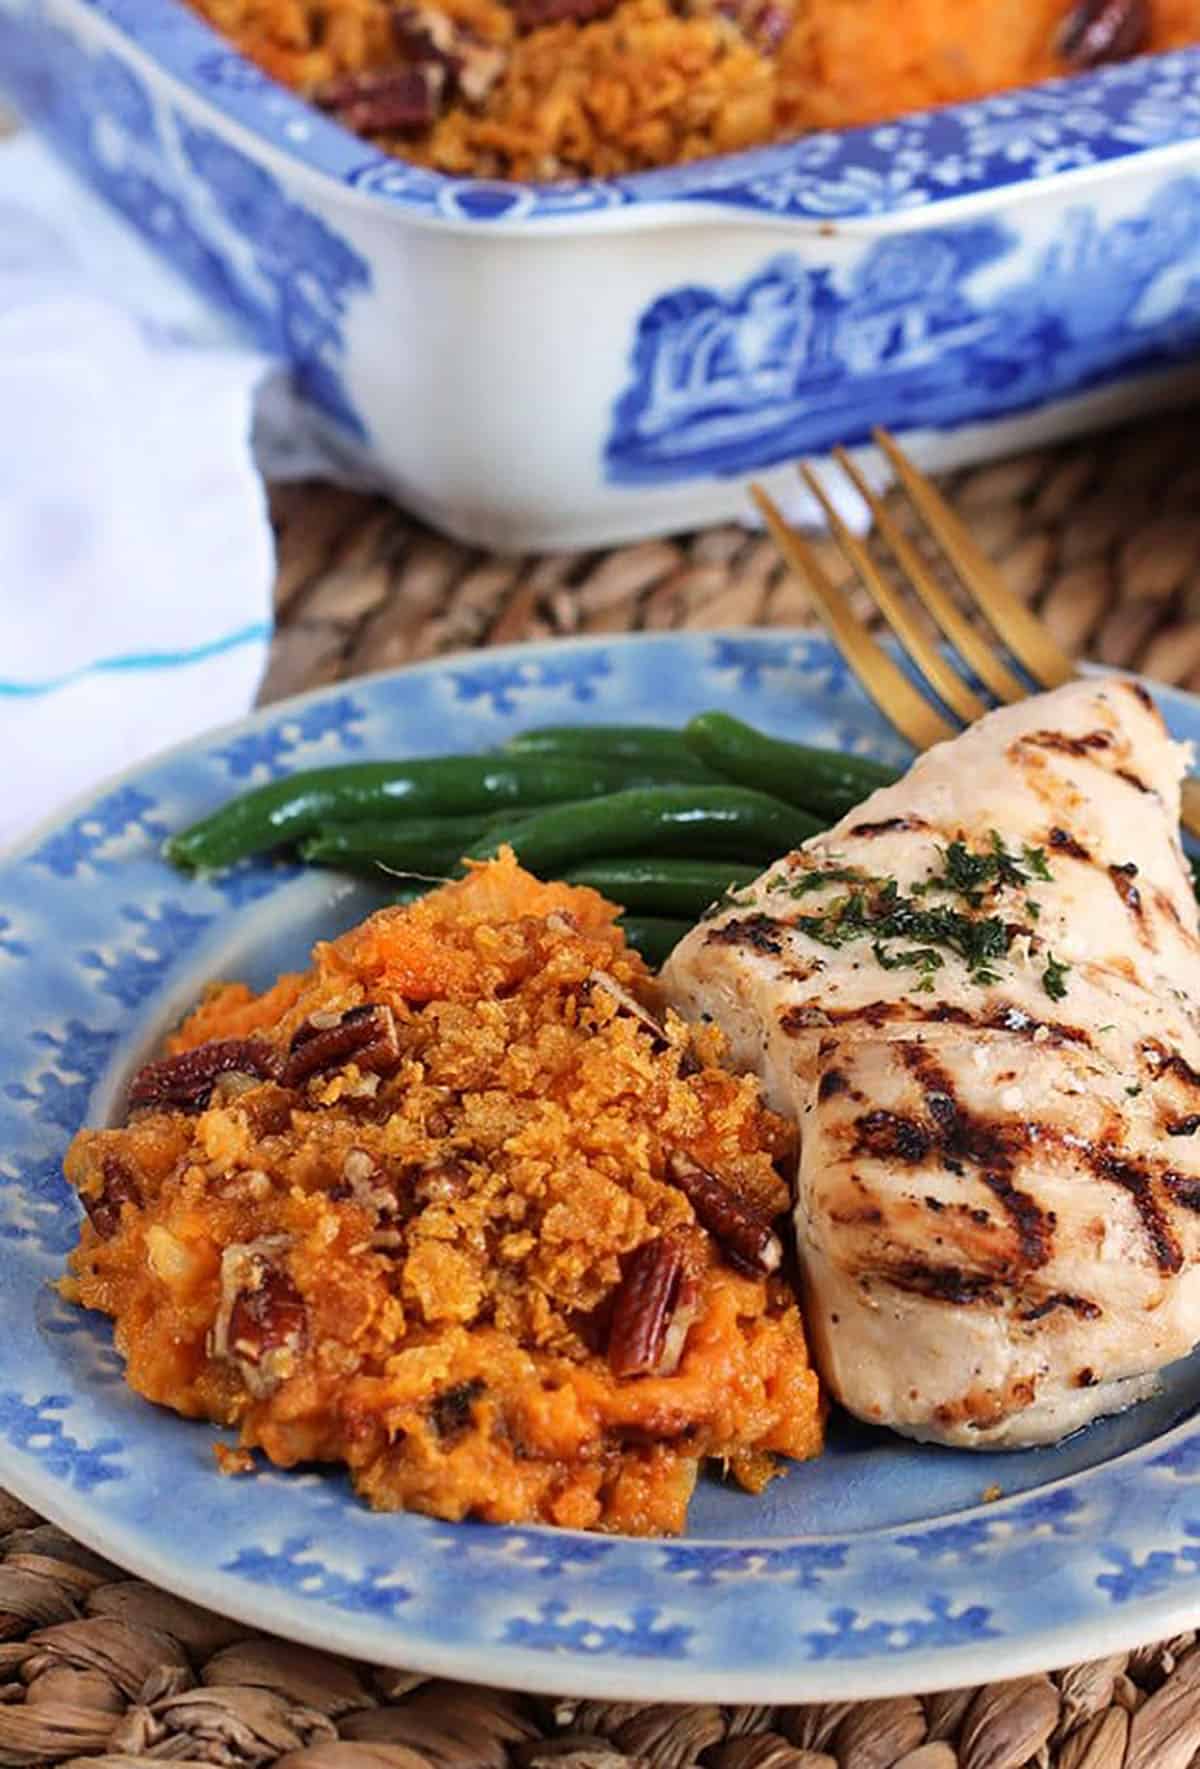 Sweet Potato Casserole on a blue plate with a piece of grilled chicken breast.